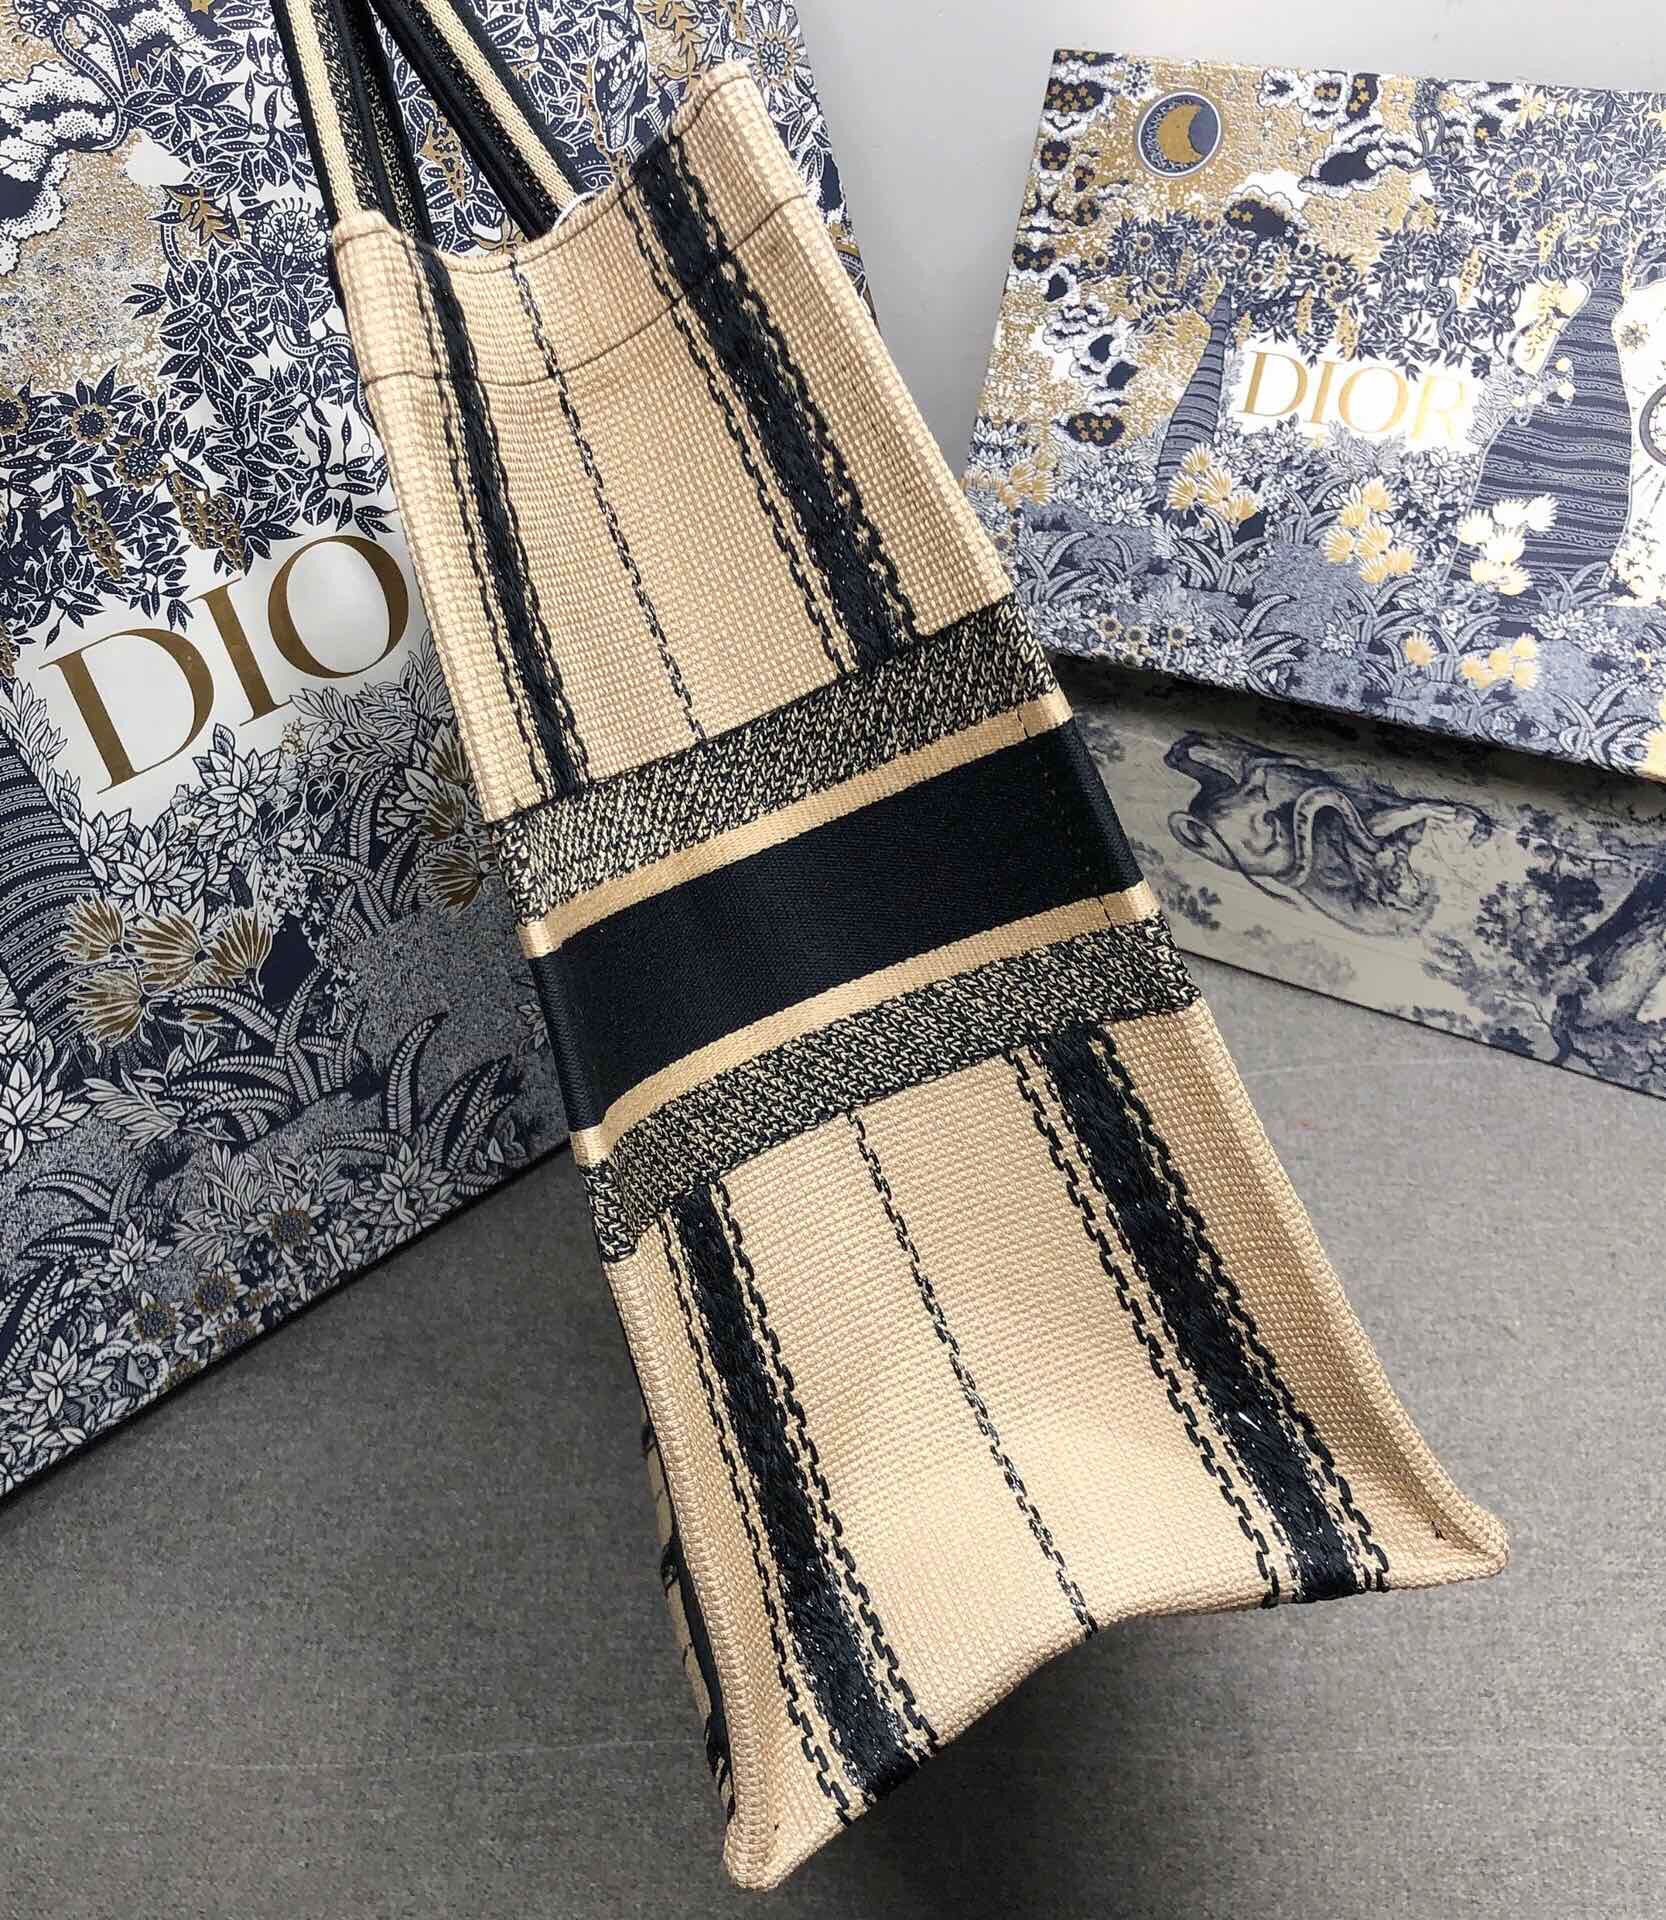 DIOR BOOK TOTE EMBROIDERED CANVAS BAG M1287-9